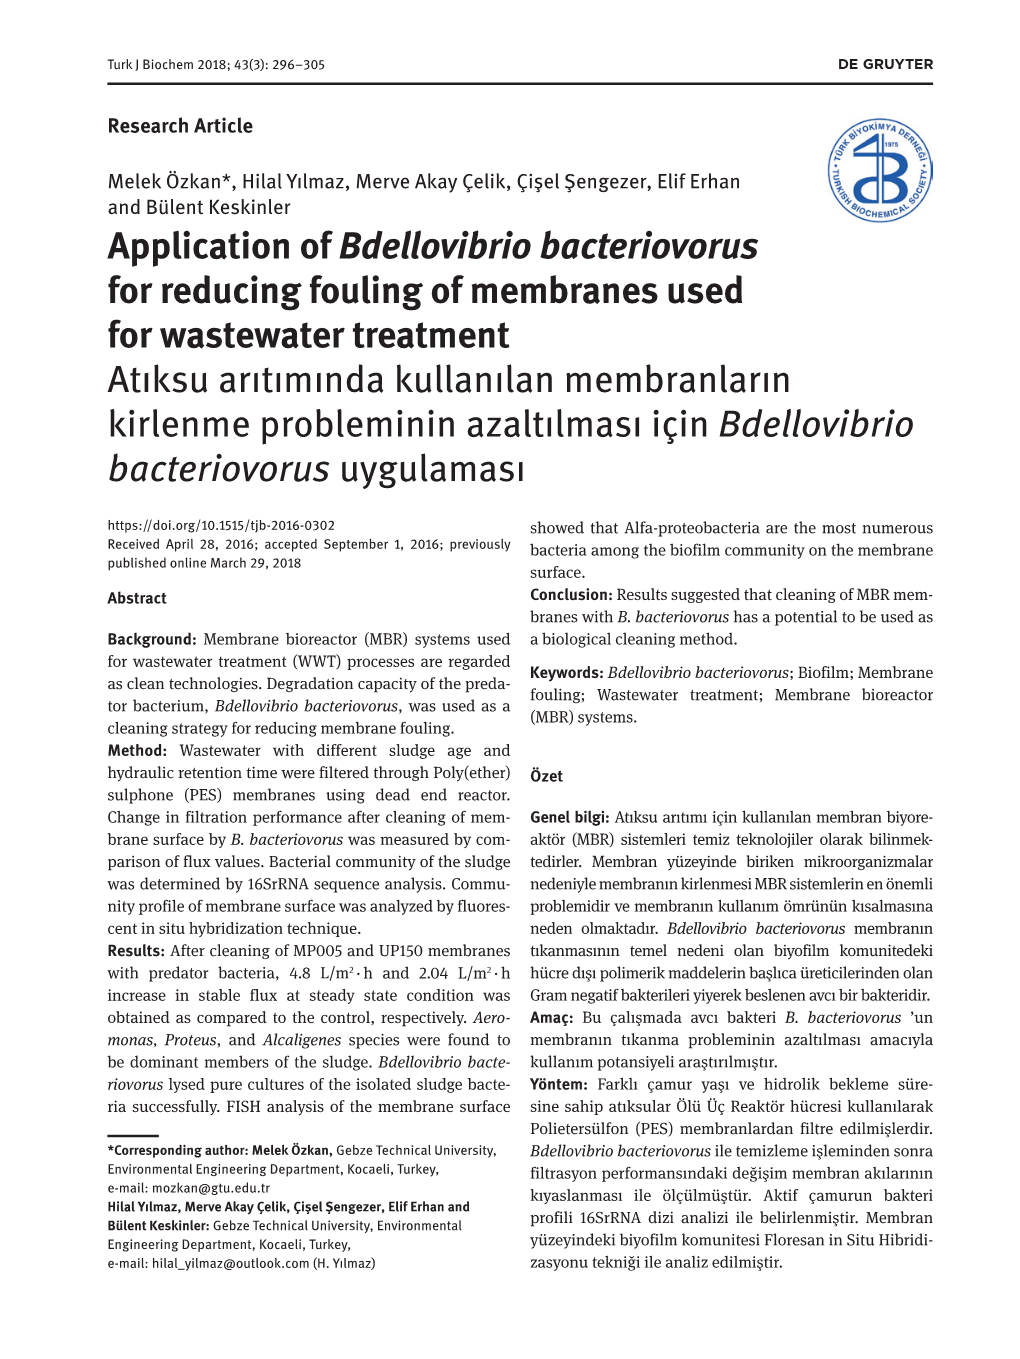 Application of Bdellovibrio Bacteriovorus for Reducing Fouling Of